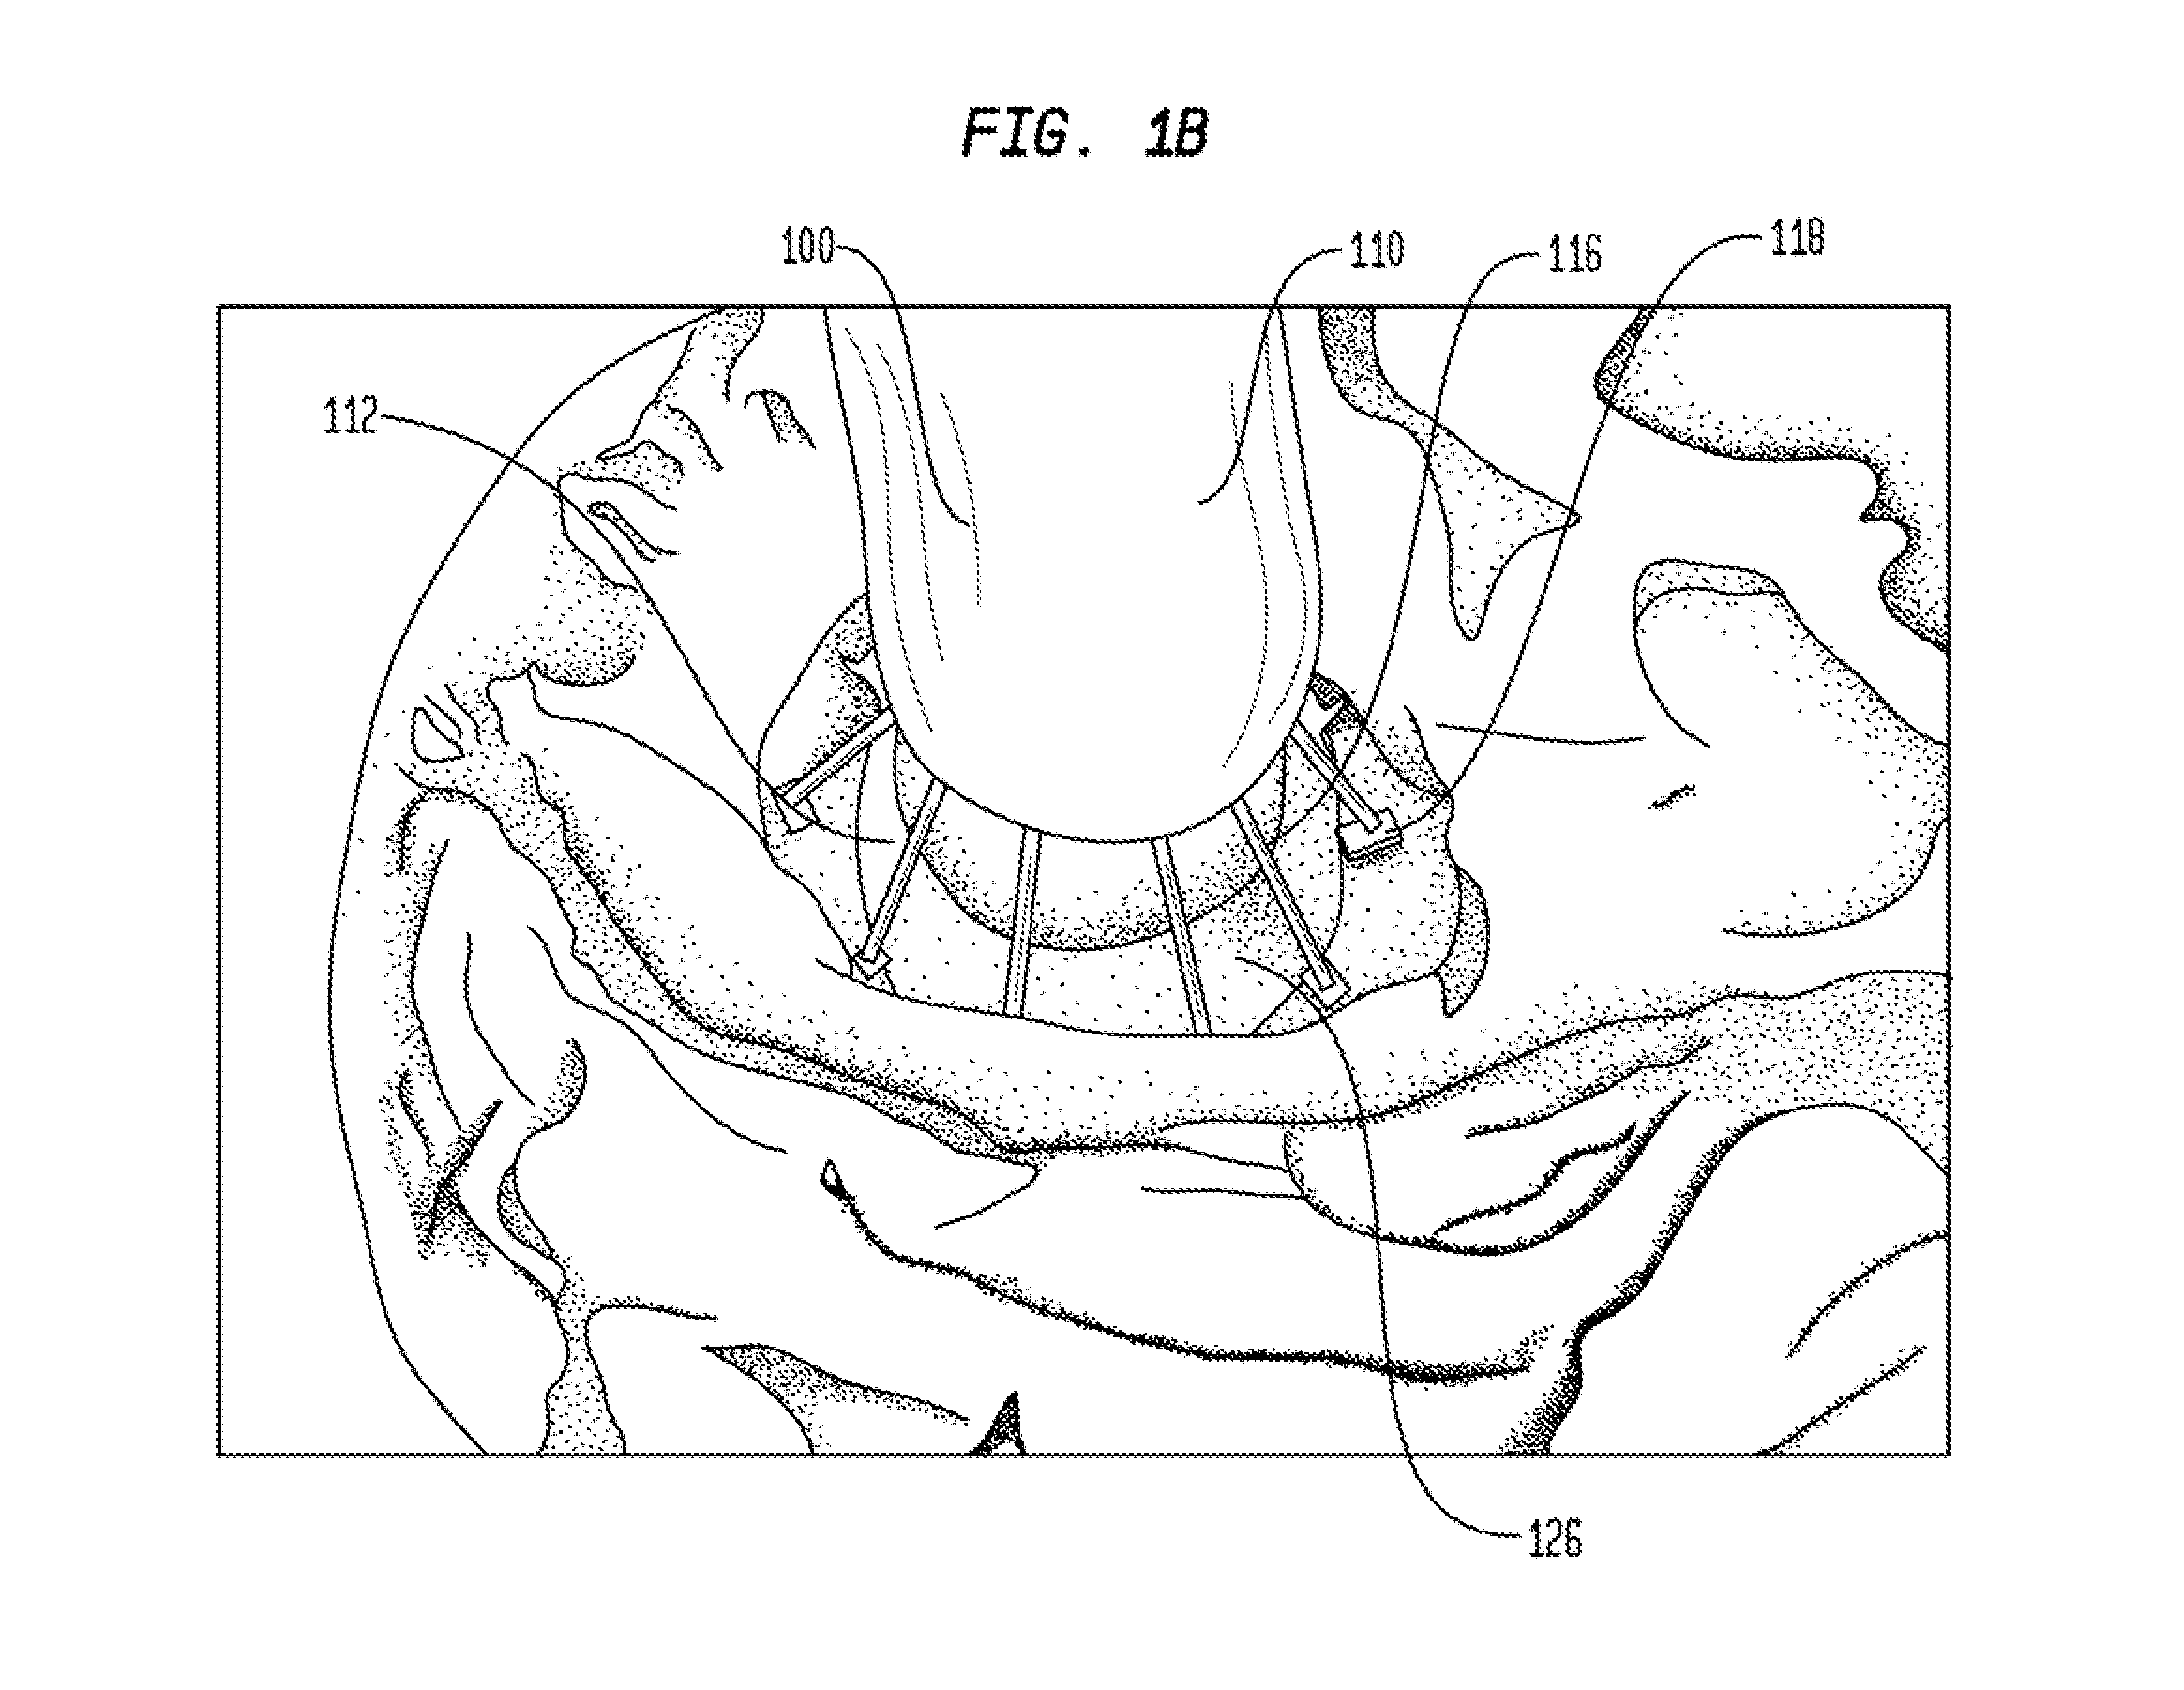 Inflatable minimally invasive system for delivering and securing an annular implant